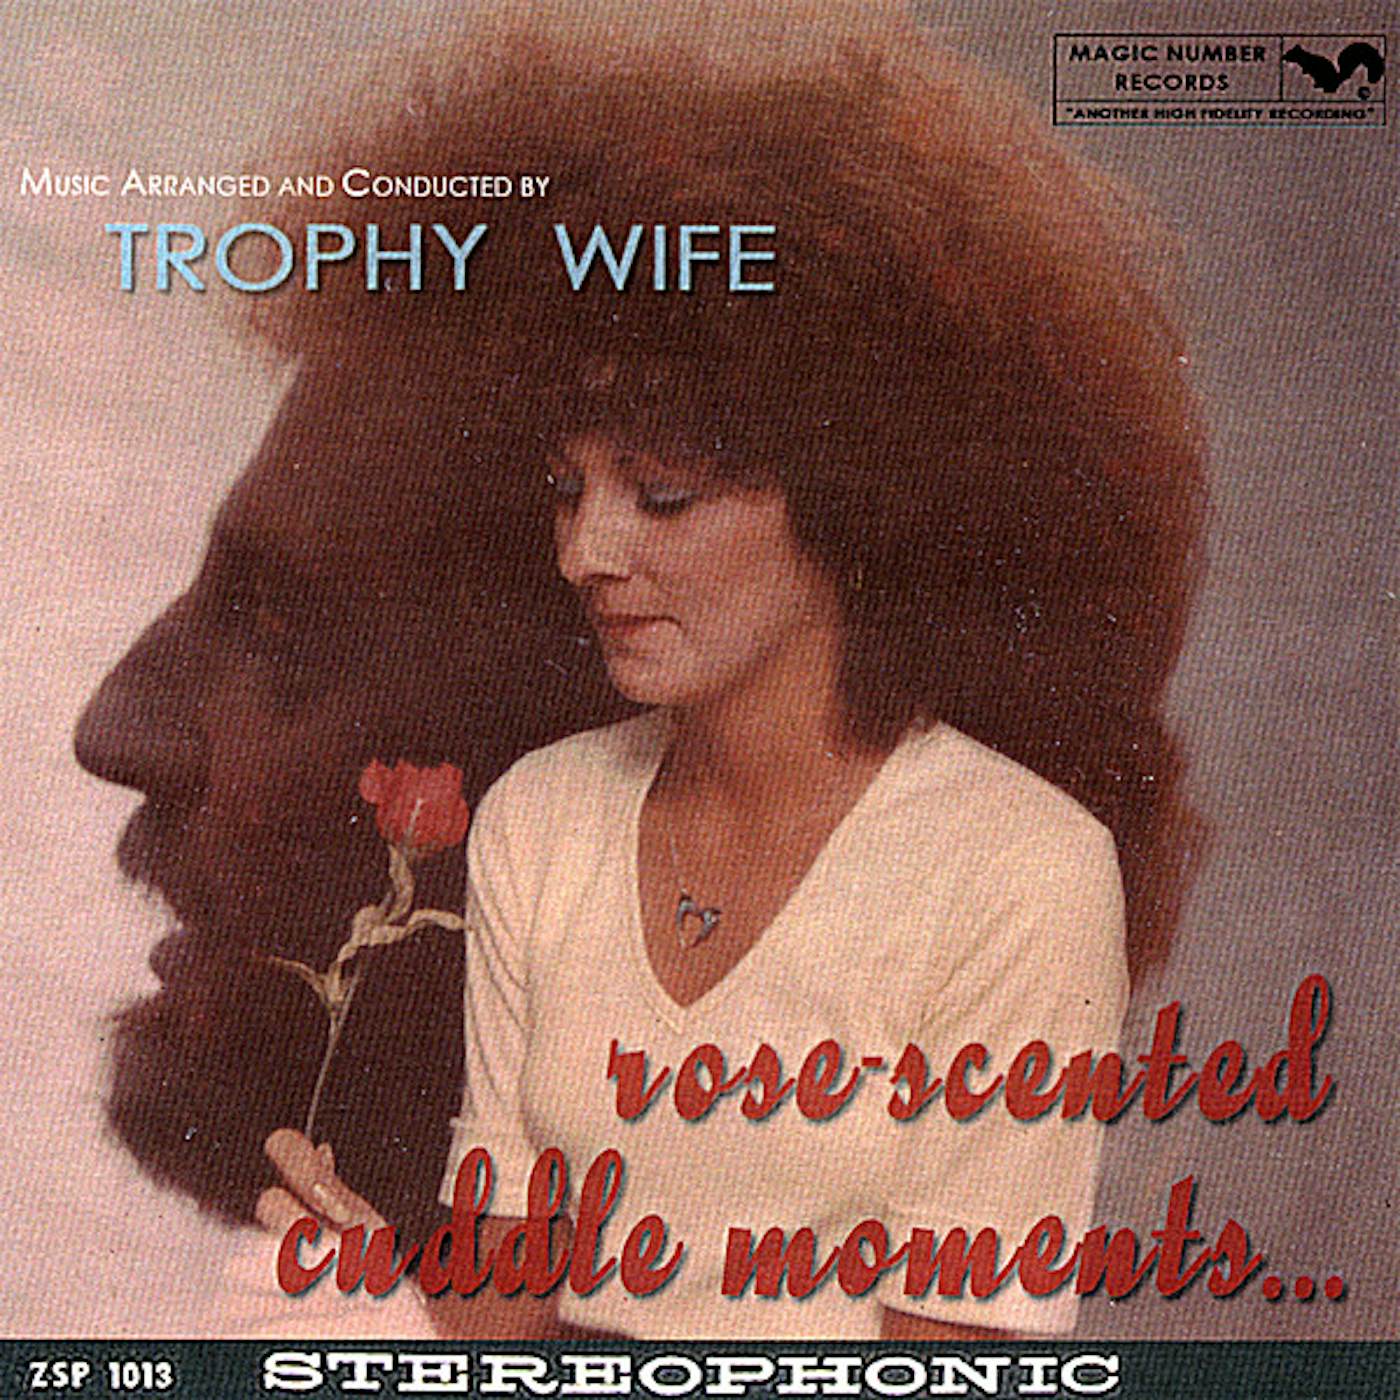 Trophy Wife ROSE-SCENTED CUDDLE MOMENTS CD